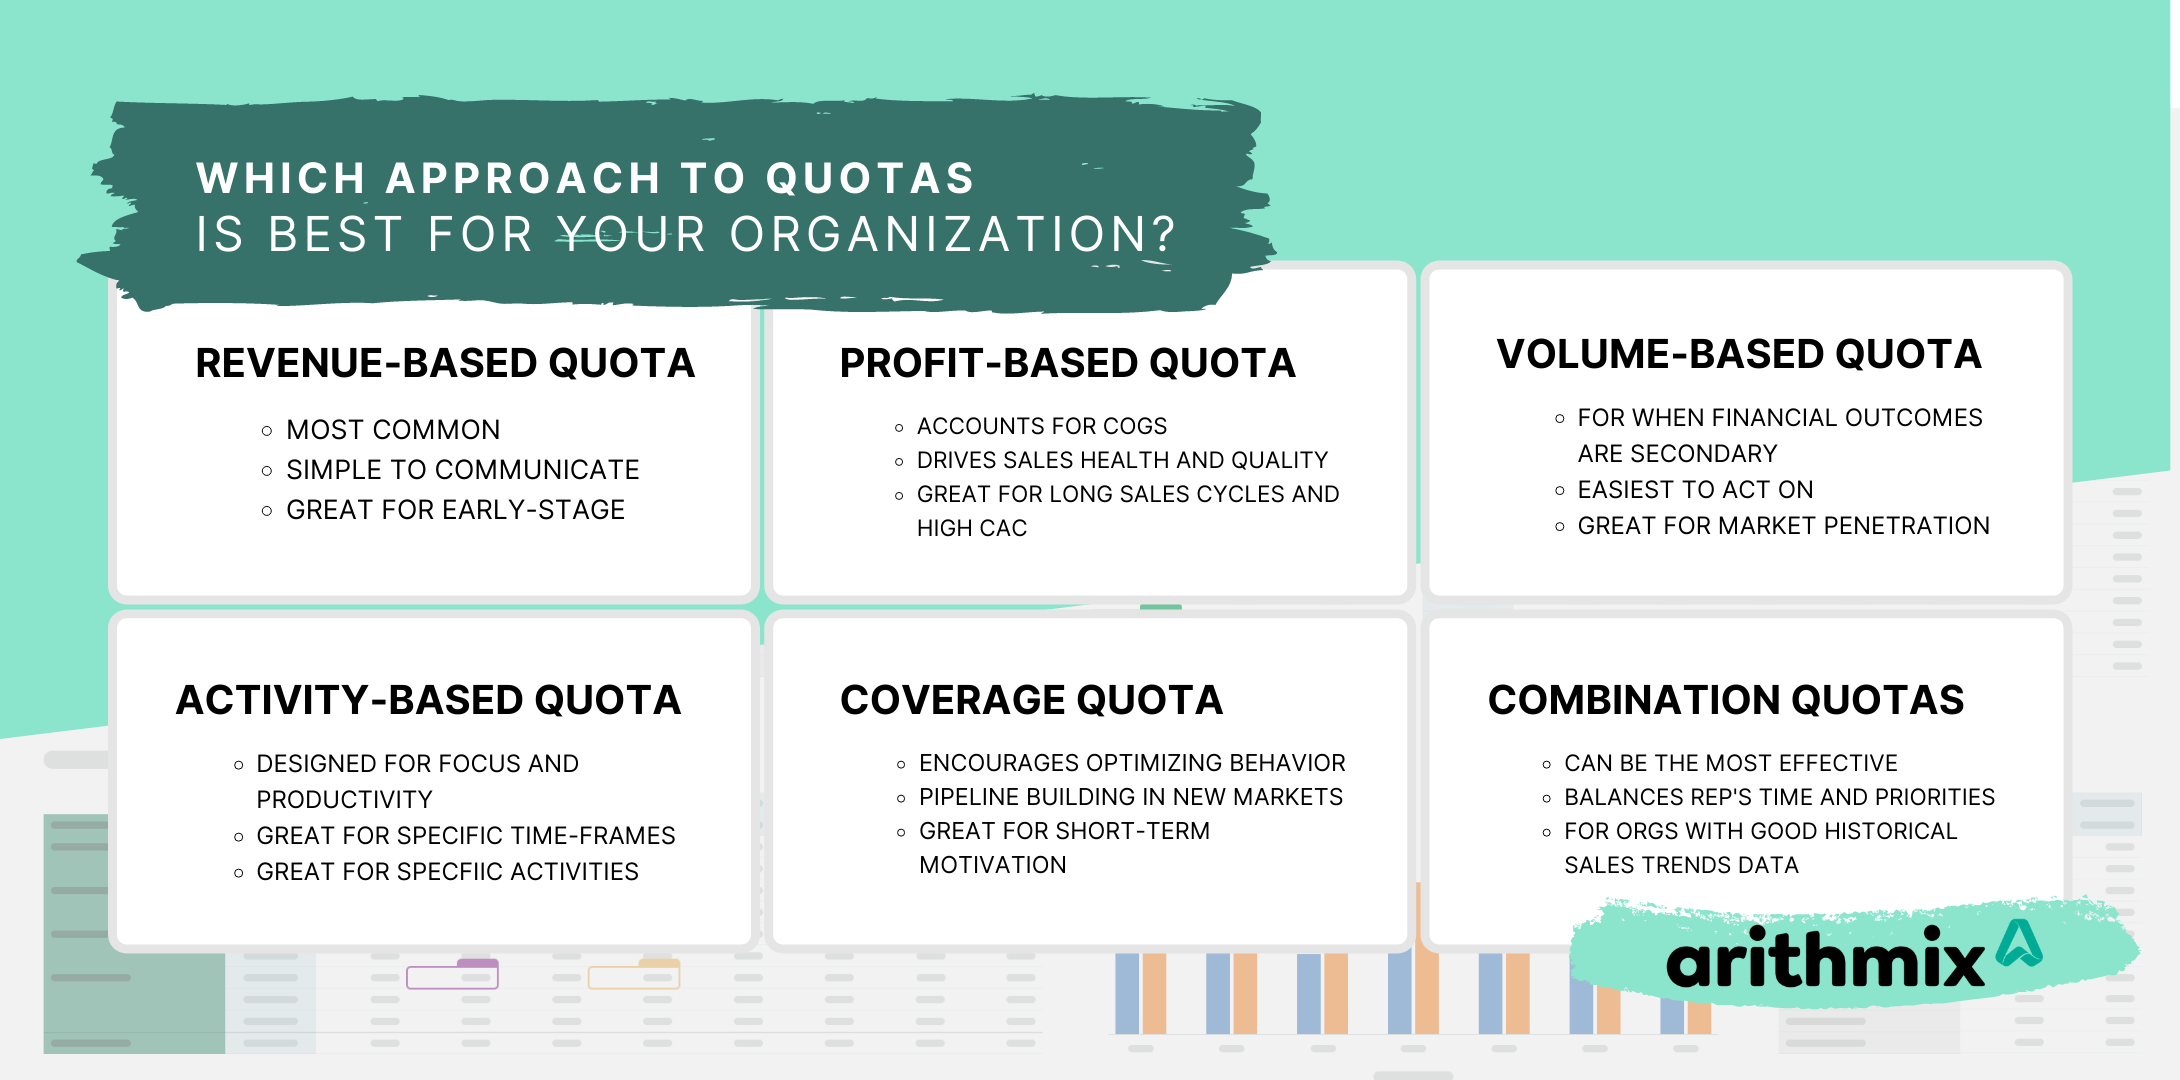 Comparison of Different Approaches to Sales Quota from our team at Arithmix - Which approach to sales quotas is best for your organization? Revenue-based quota, Profit-based quota, Volume-based quota, Activity-based quota, Coverage quota, Combination quotas